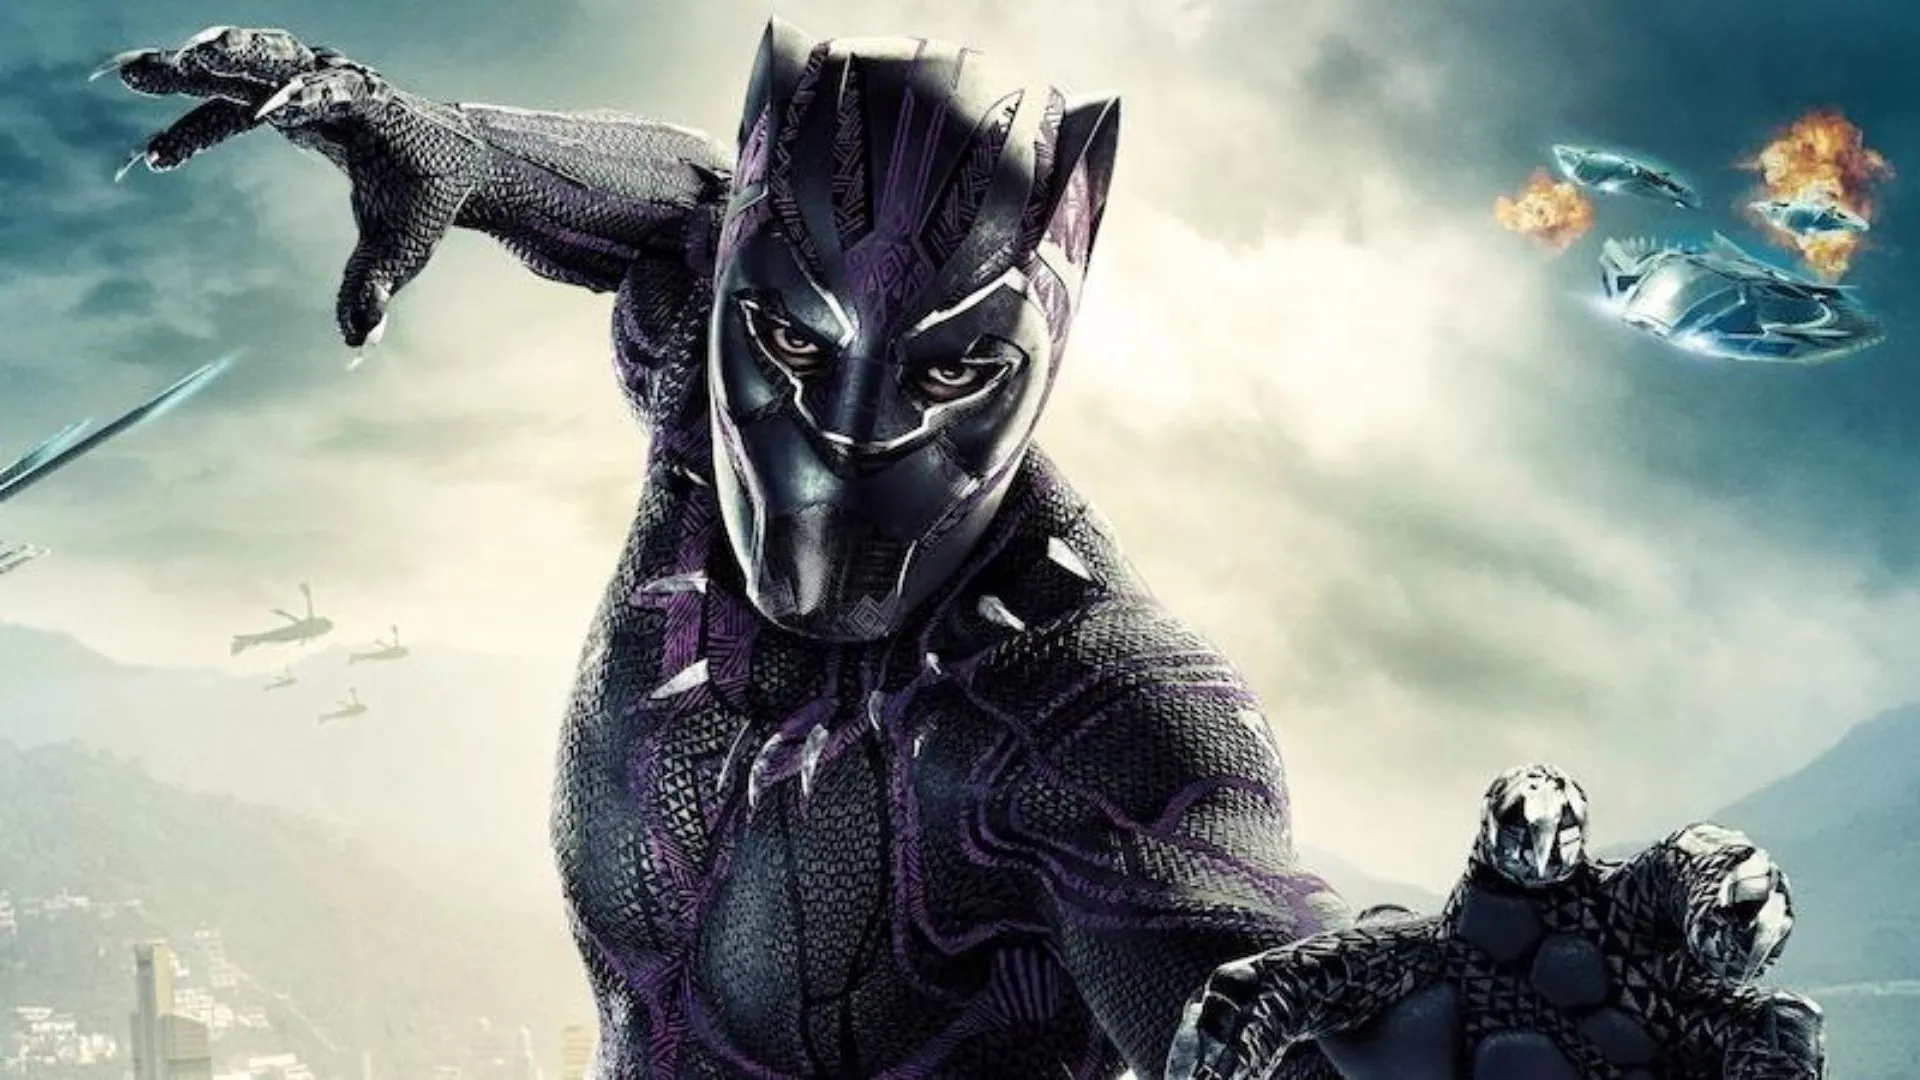 Kevin Feige spoke about the studio’s decision not to recast T’Challa